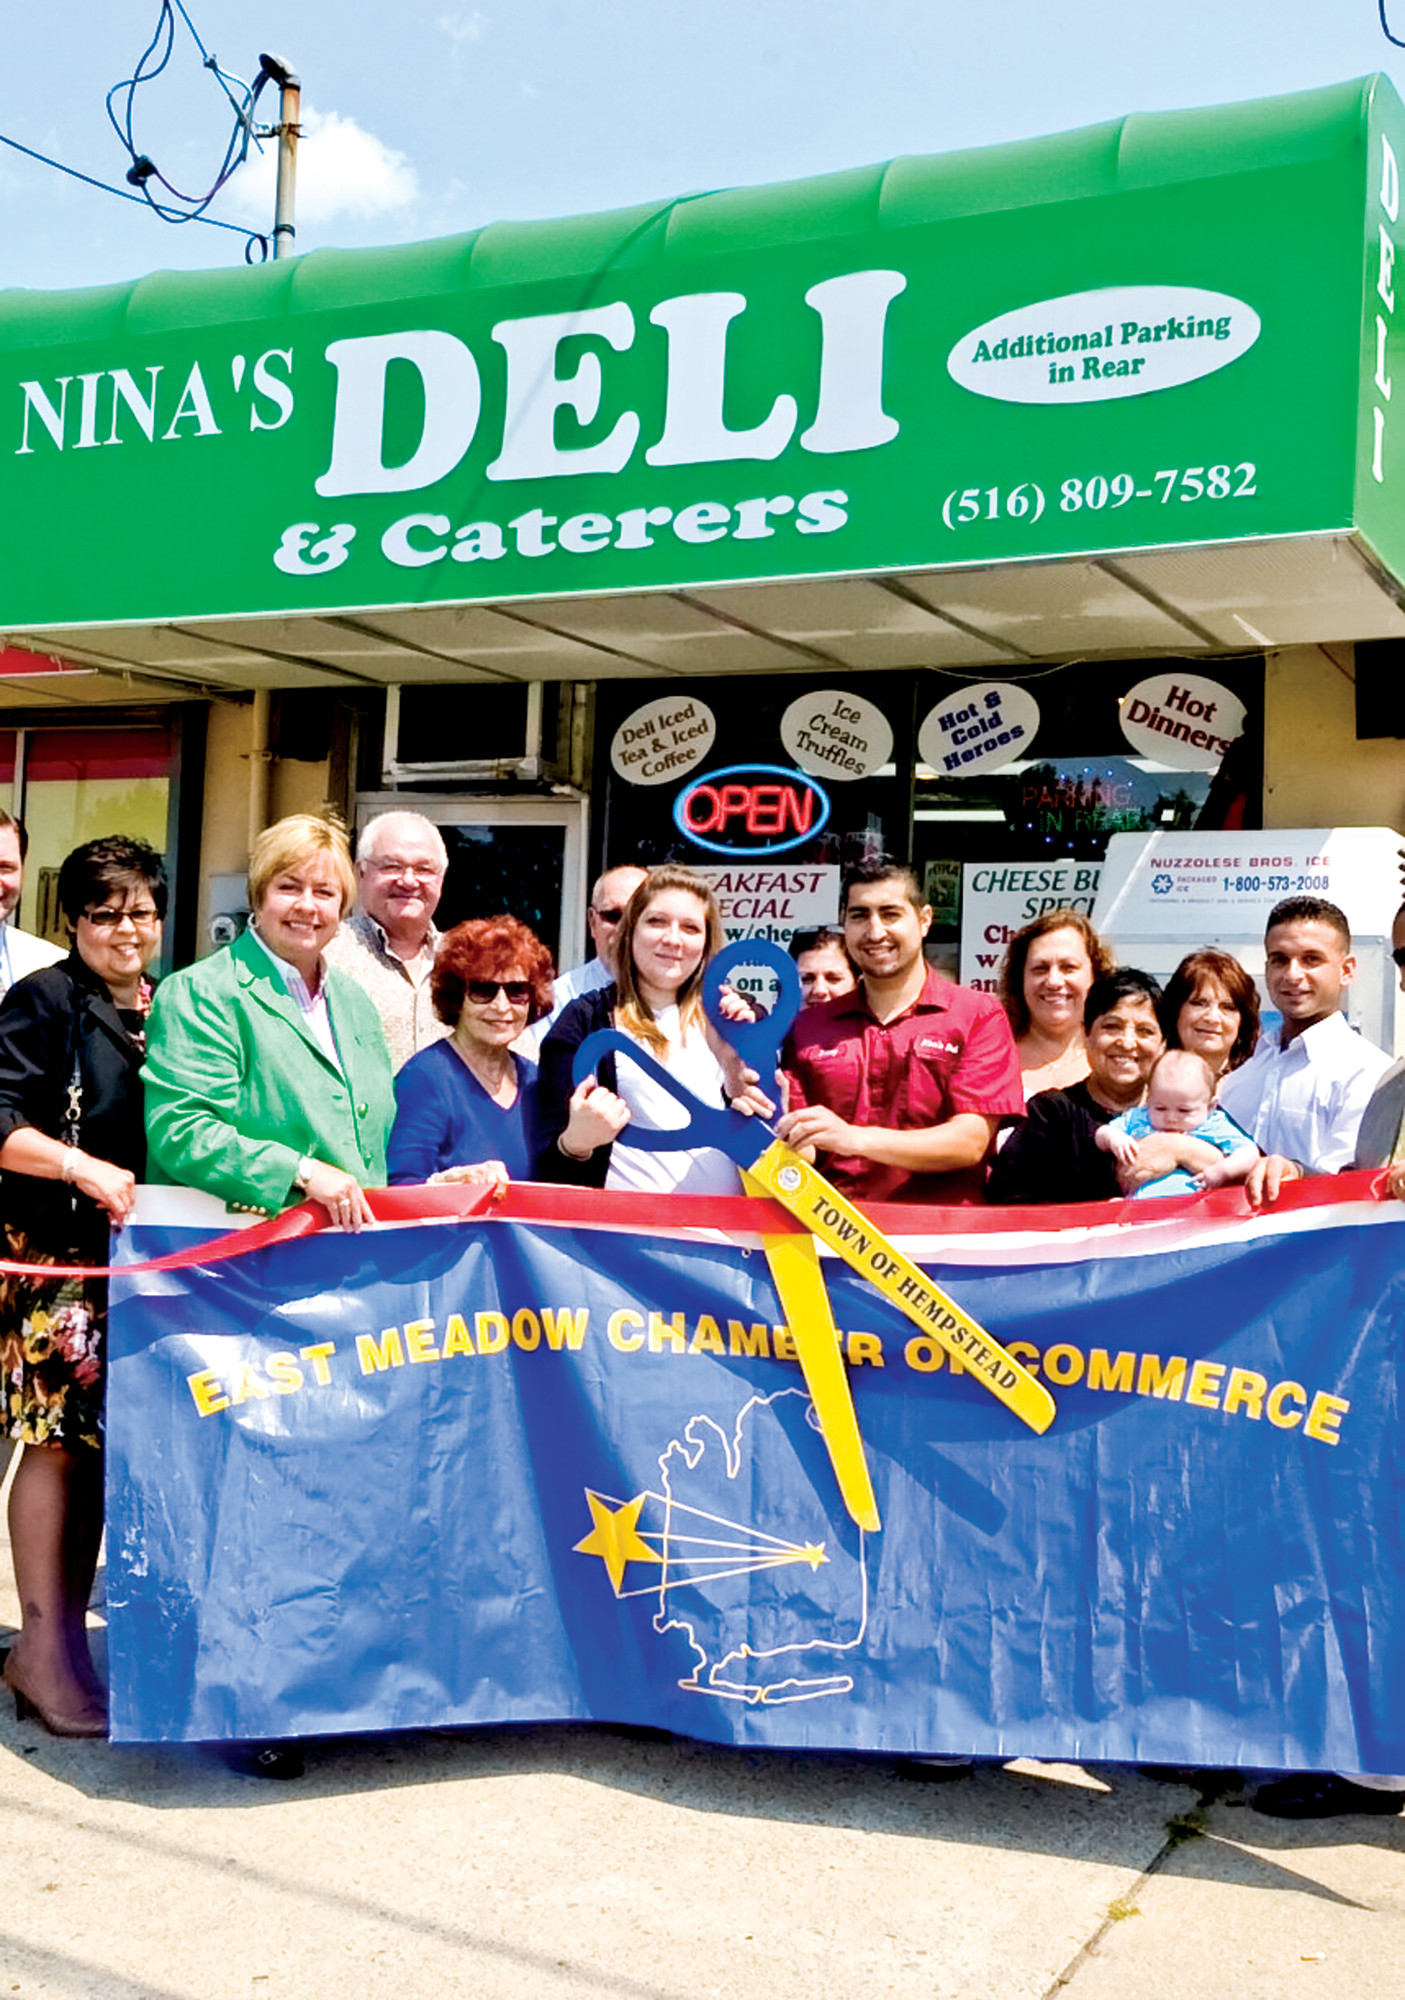 Benny Disaparra almost had to shut down his business, Nina's Italian Deli, after Hurricane Sandy. Lacking power for two days, the lifelong East Meadow resident said he lost all of his merchandise. But he, like so many other businessowners, came back even stronger. Earlier this summer, the community celebrated his relocation to a bigger space on Newbridge Road.